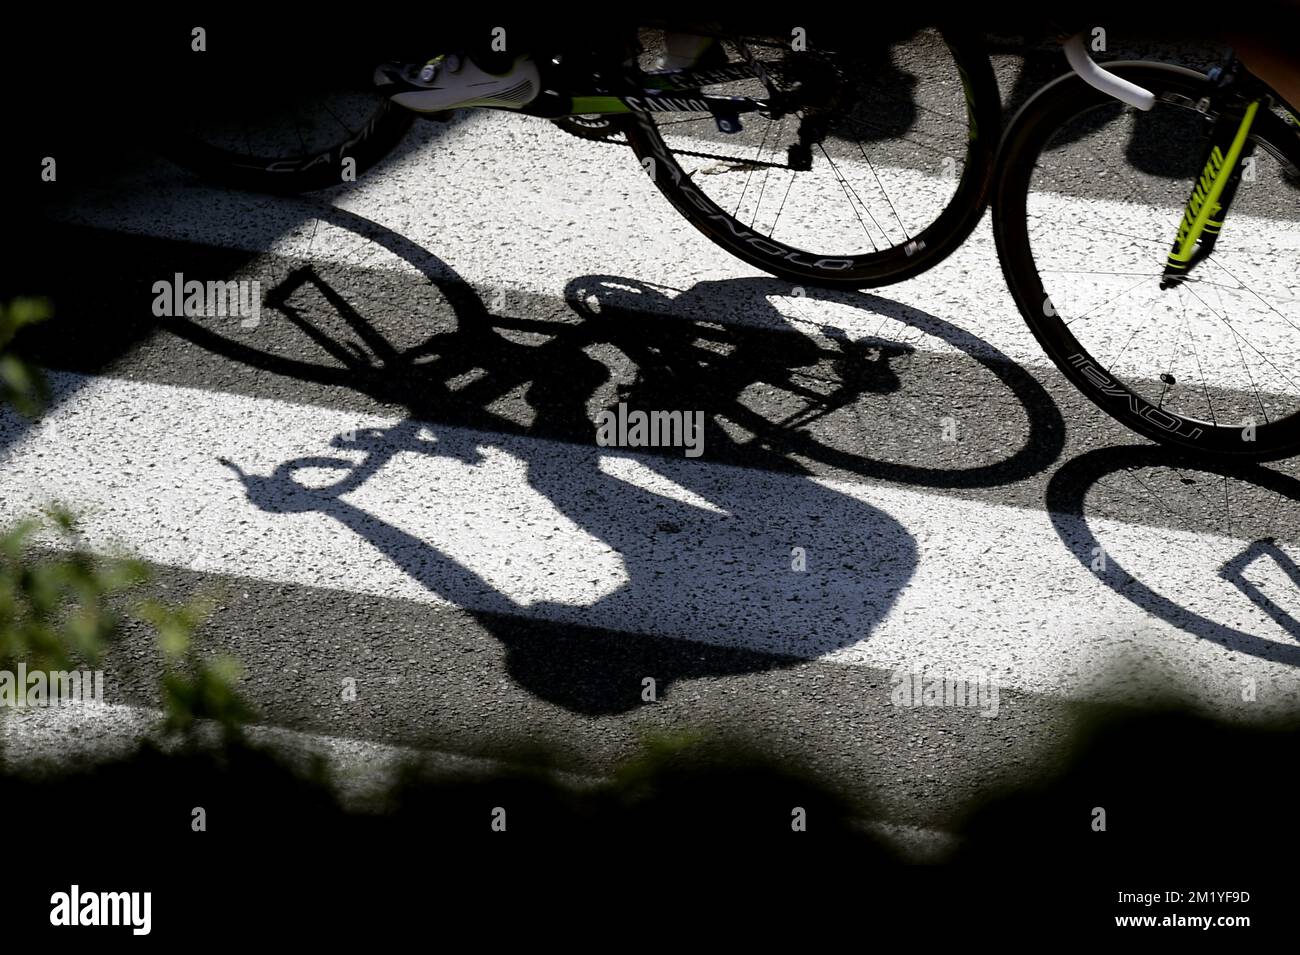 Illustration picture shows the shadow of a rider during stage 11 of the 2015 edition of the Tour de France cycling race, 188 km from Pau to Vallee de Saint-Savin, Cauterets, France, Wednesday 15 July 2015. This year's Tour de France is taking place from 4 to 26 July.  Stock Photo